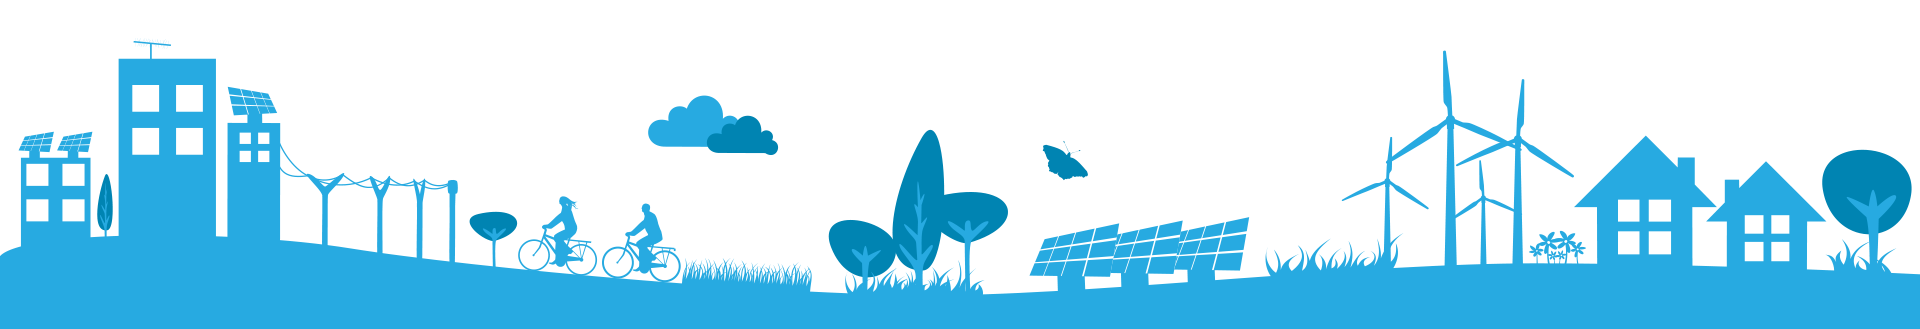 Illustration: Community with energy efficient buildings, solar panel array, wind turbines, trees, flowers, and people riding bicycles.